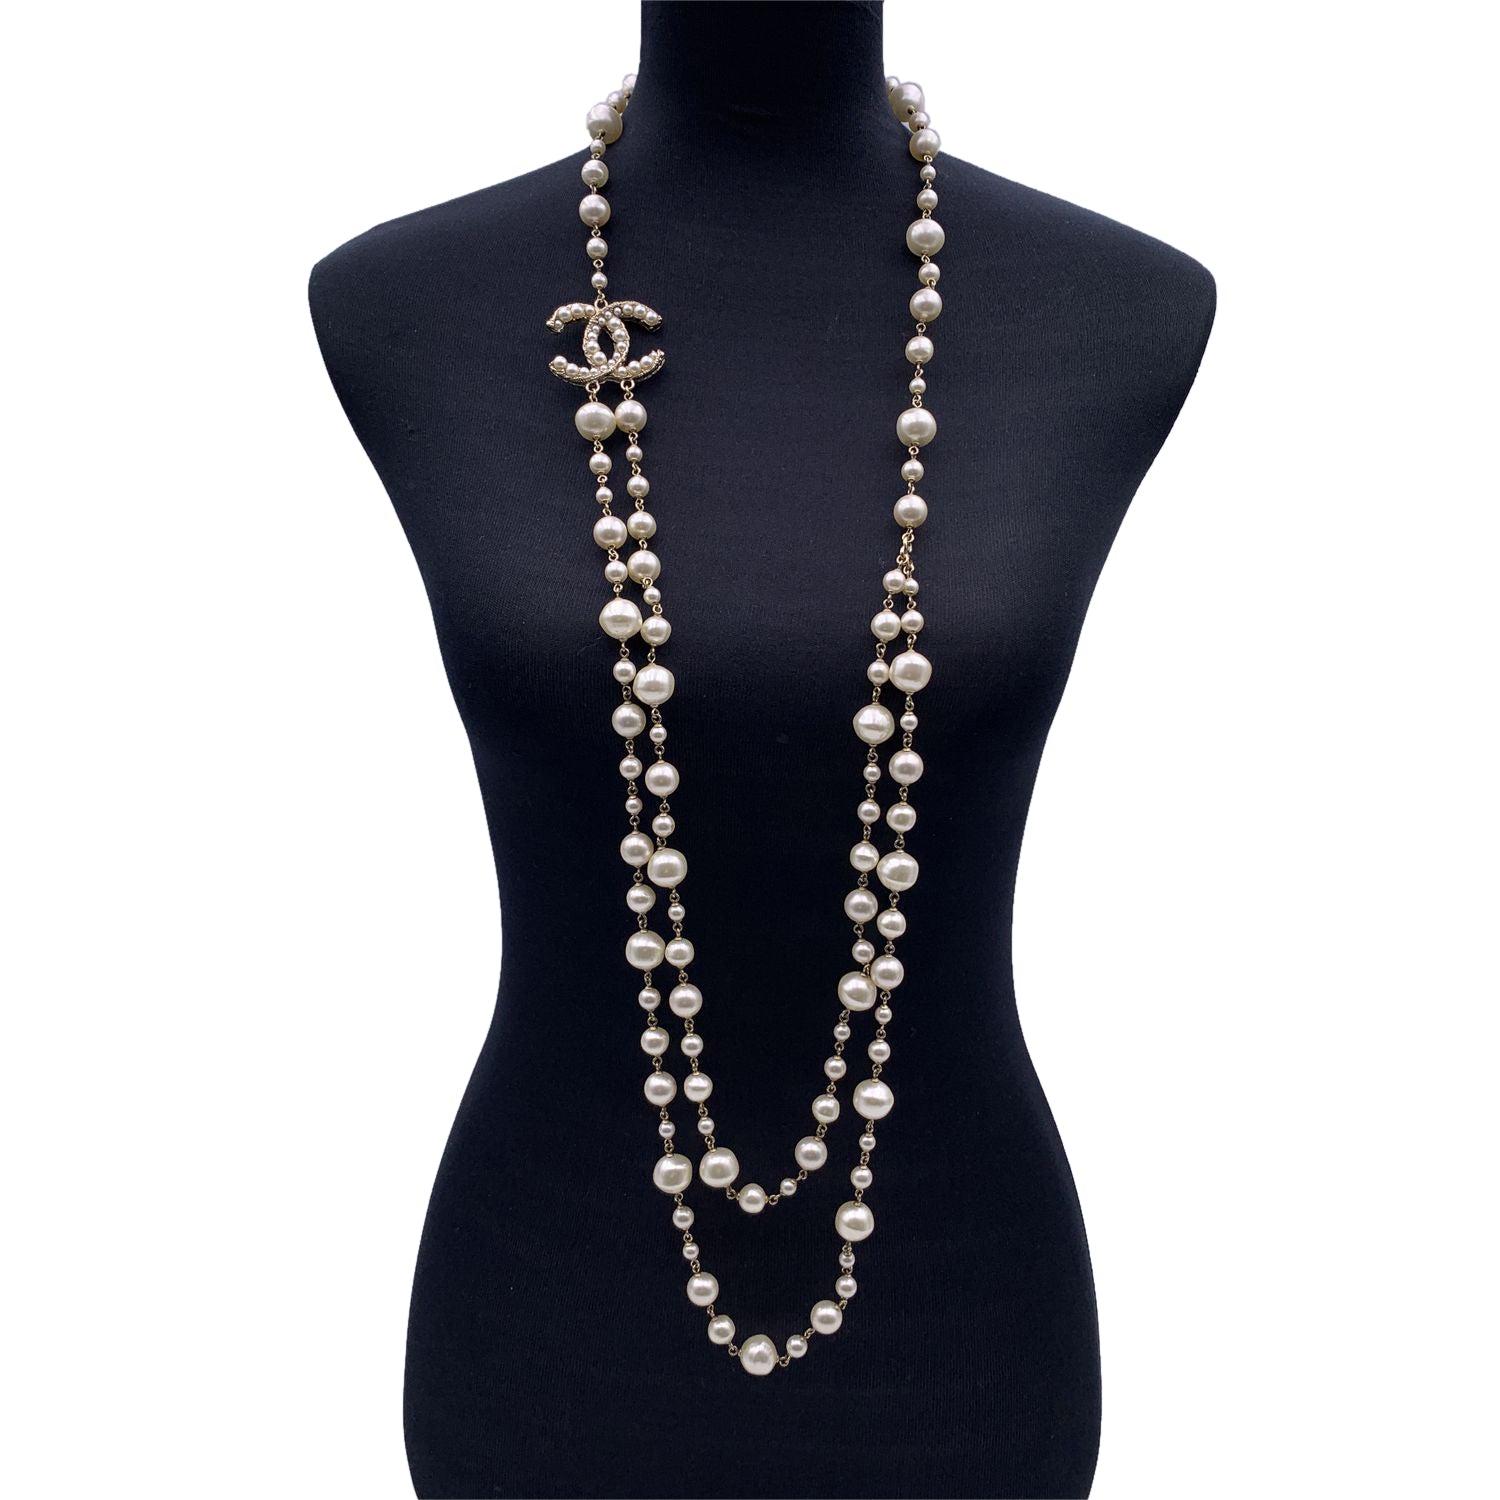 Long light gold metal double strand chain necklace by Chanel. It features artificial pearl beads in different sizes and CC logo embellished with small artficial pearls. Lobster closure. 'CHANEL - A11 CC A- Made in France oval tab on the closure.